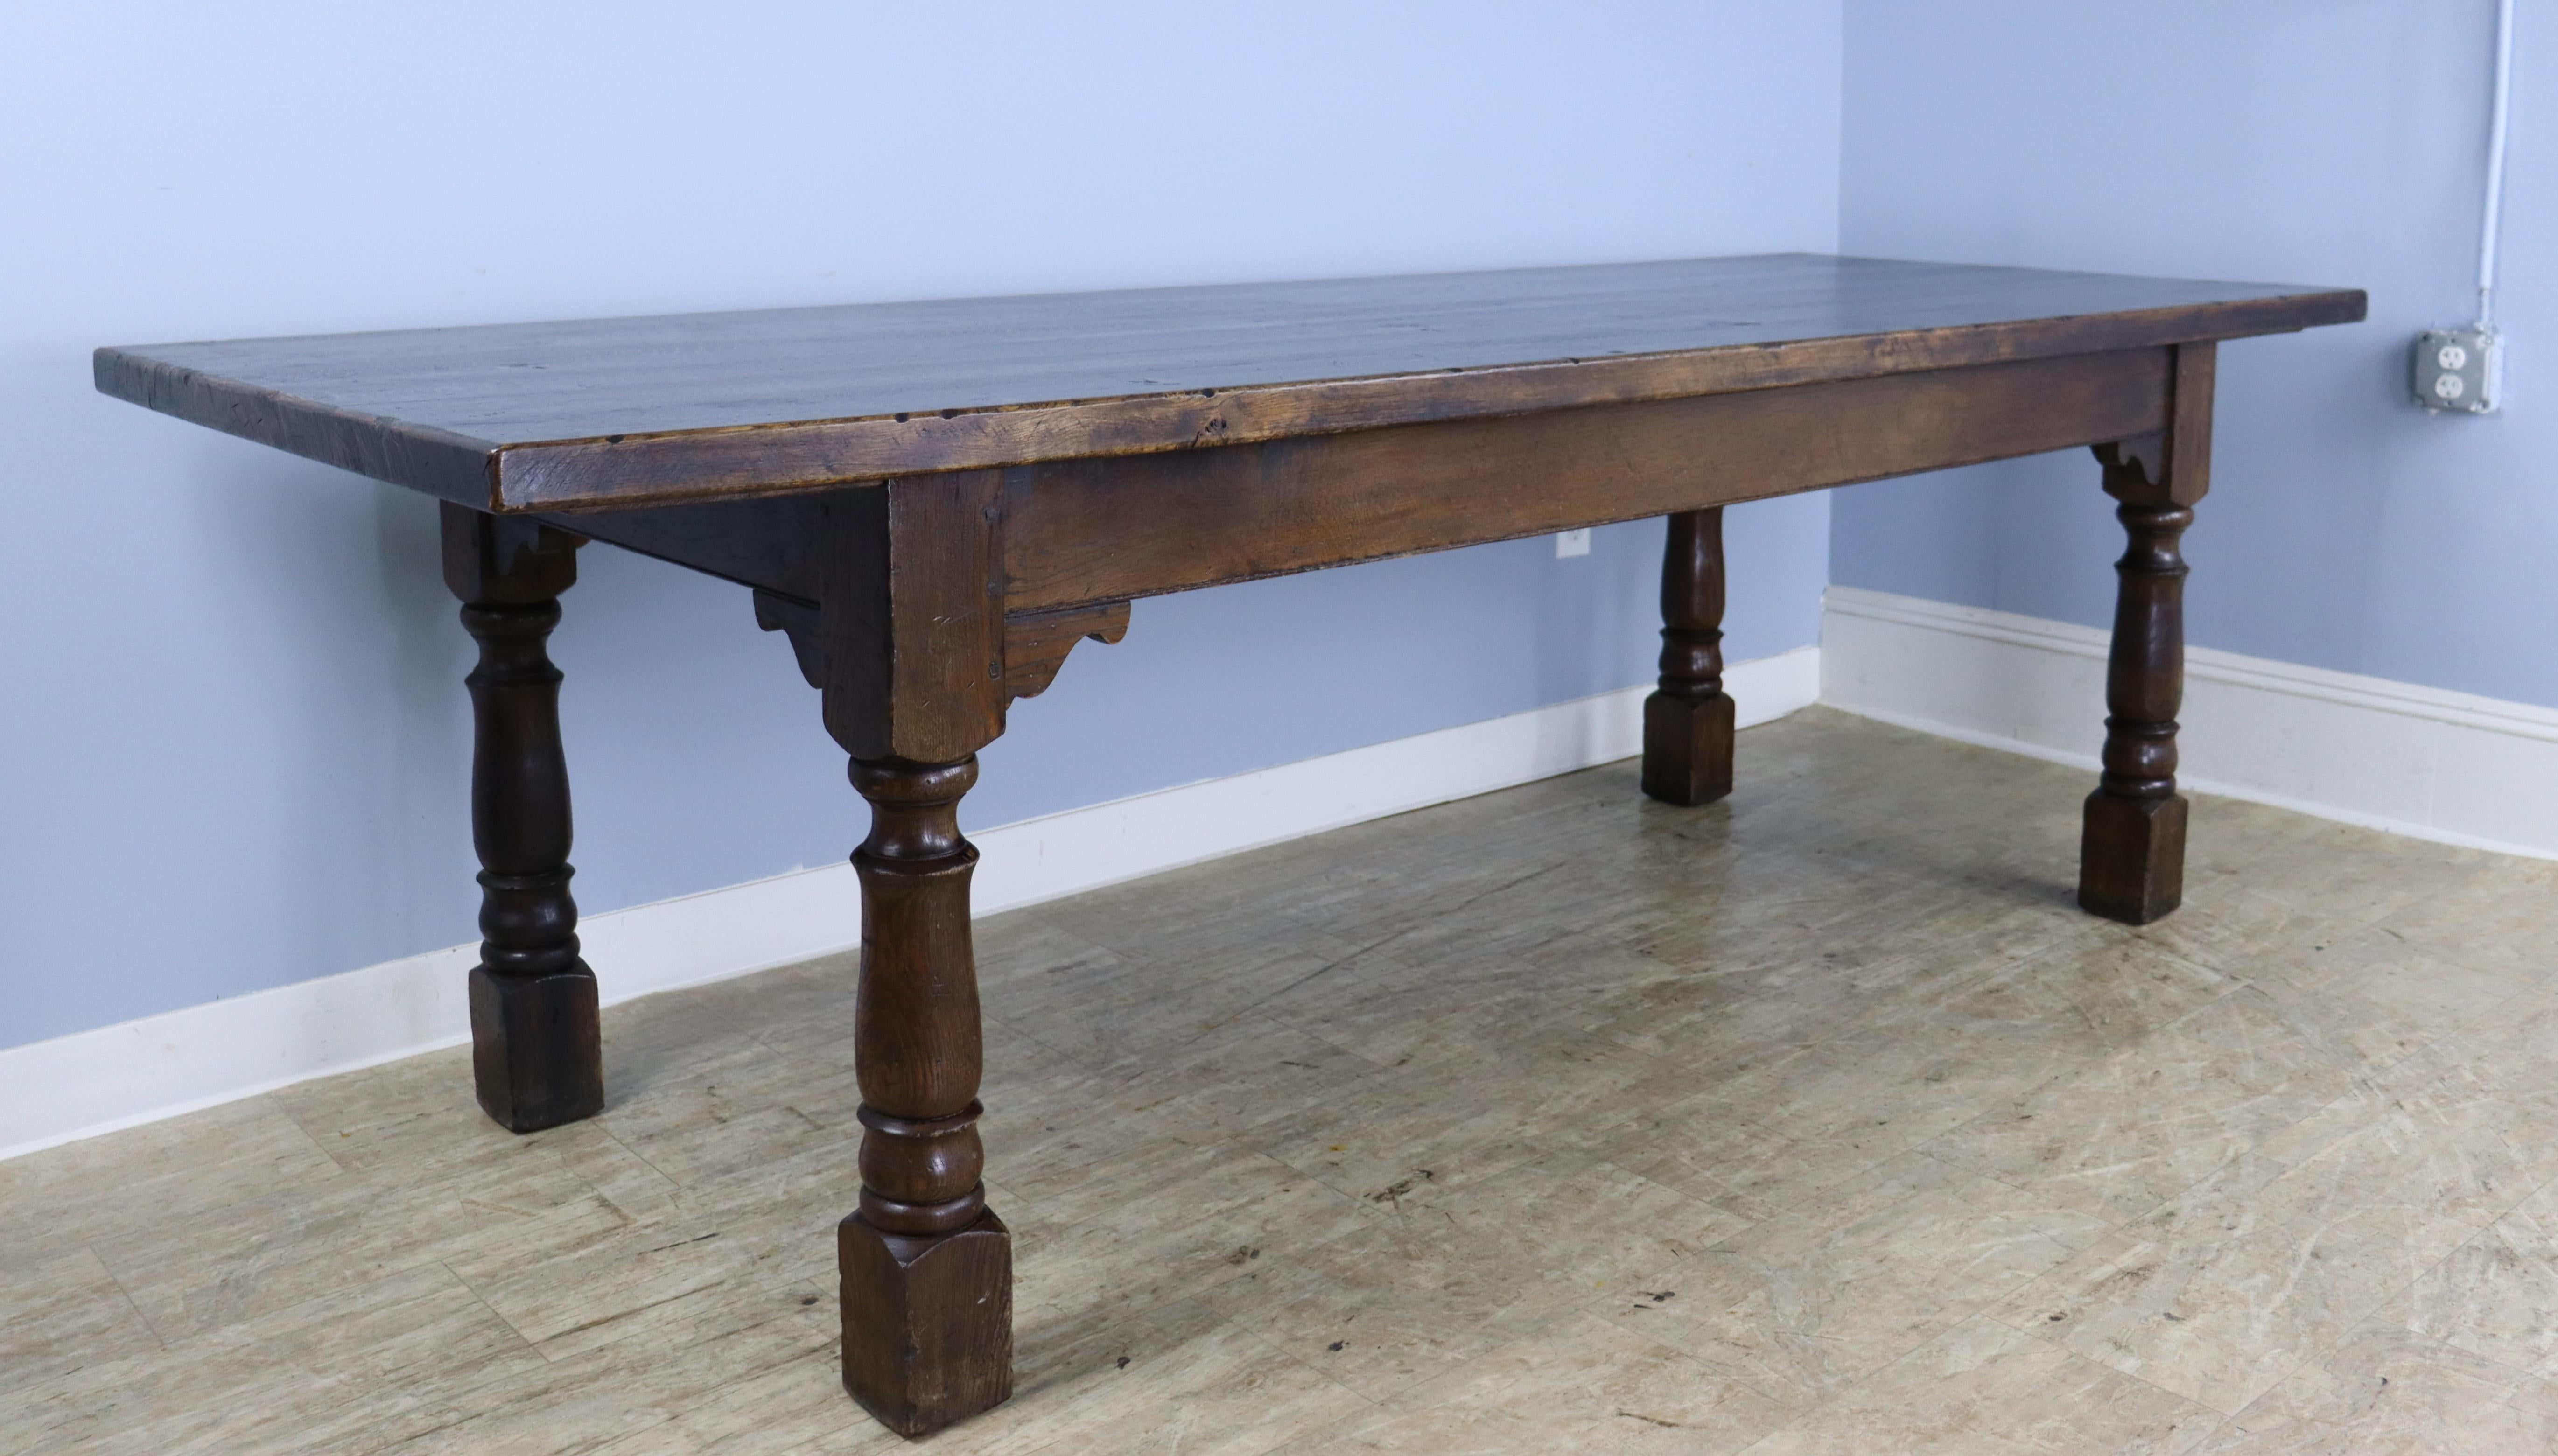 A generously proportioned almost 8' dark farm table with a thick top. The top has good texture, and the turned legs at the base add a note of grandeur. Good depth for family dining . The 24 inch apron height is good for knees, and there are 65